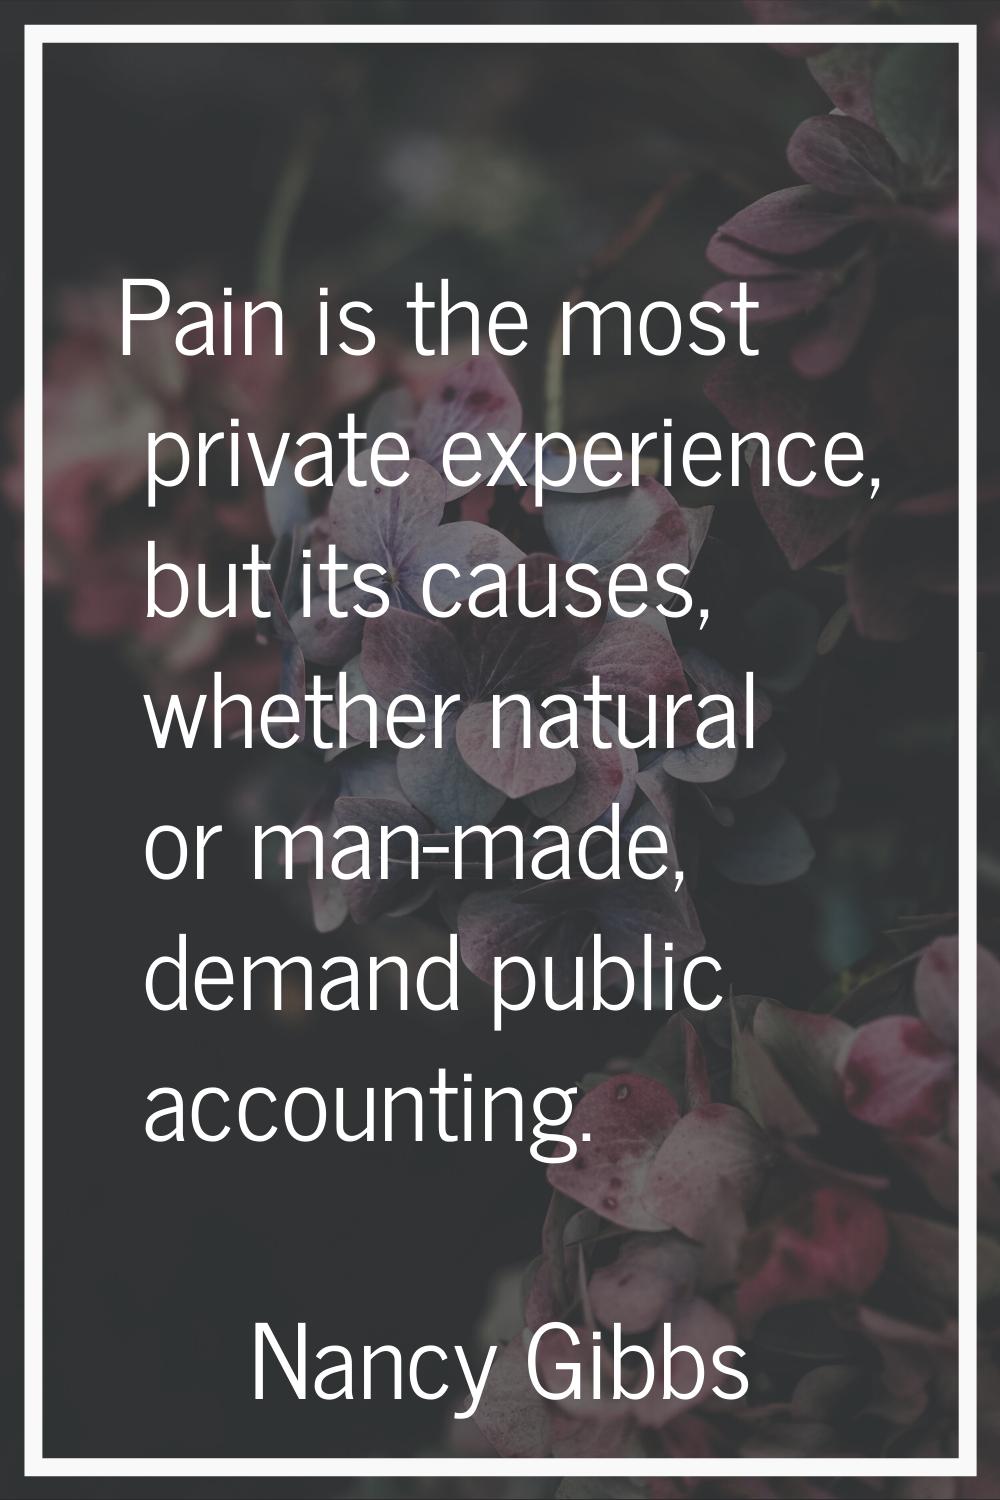 Pain is the most private experience, but its causes, whether natural or man-made, demand public acc